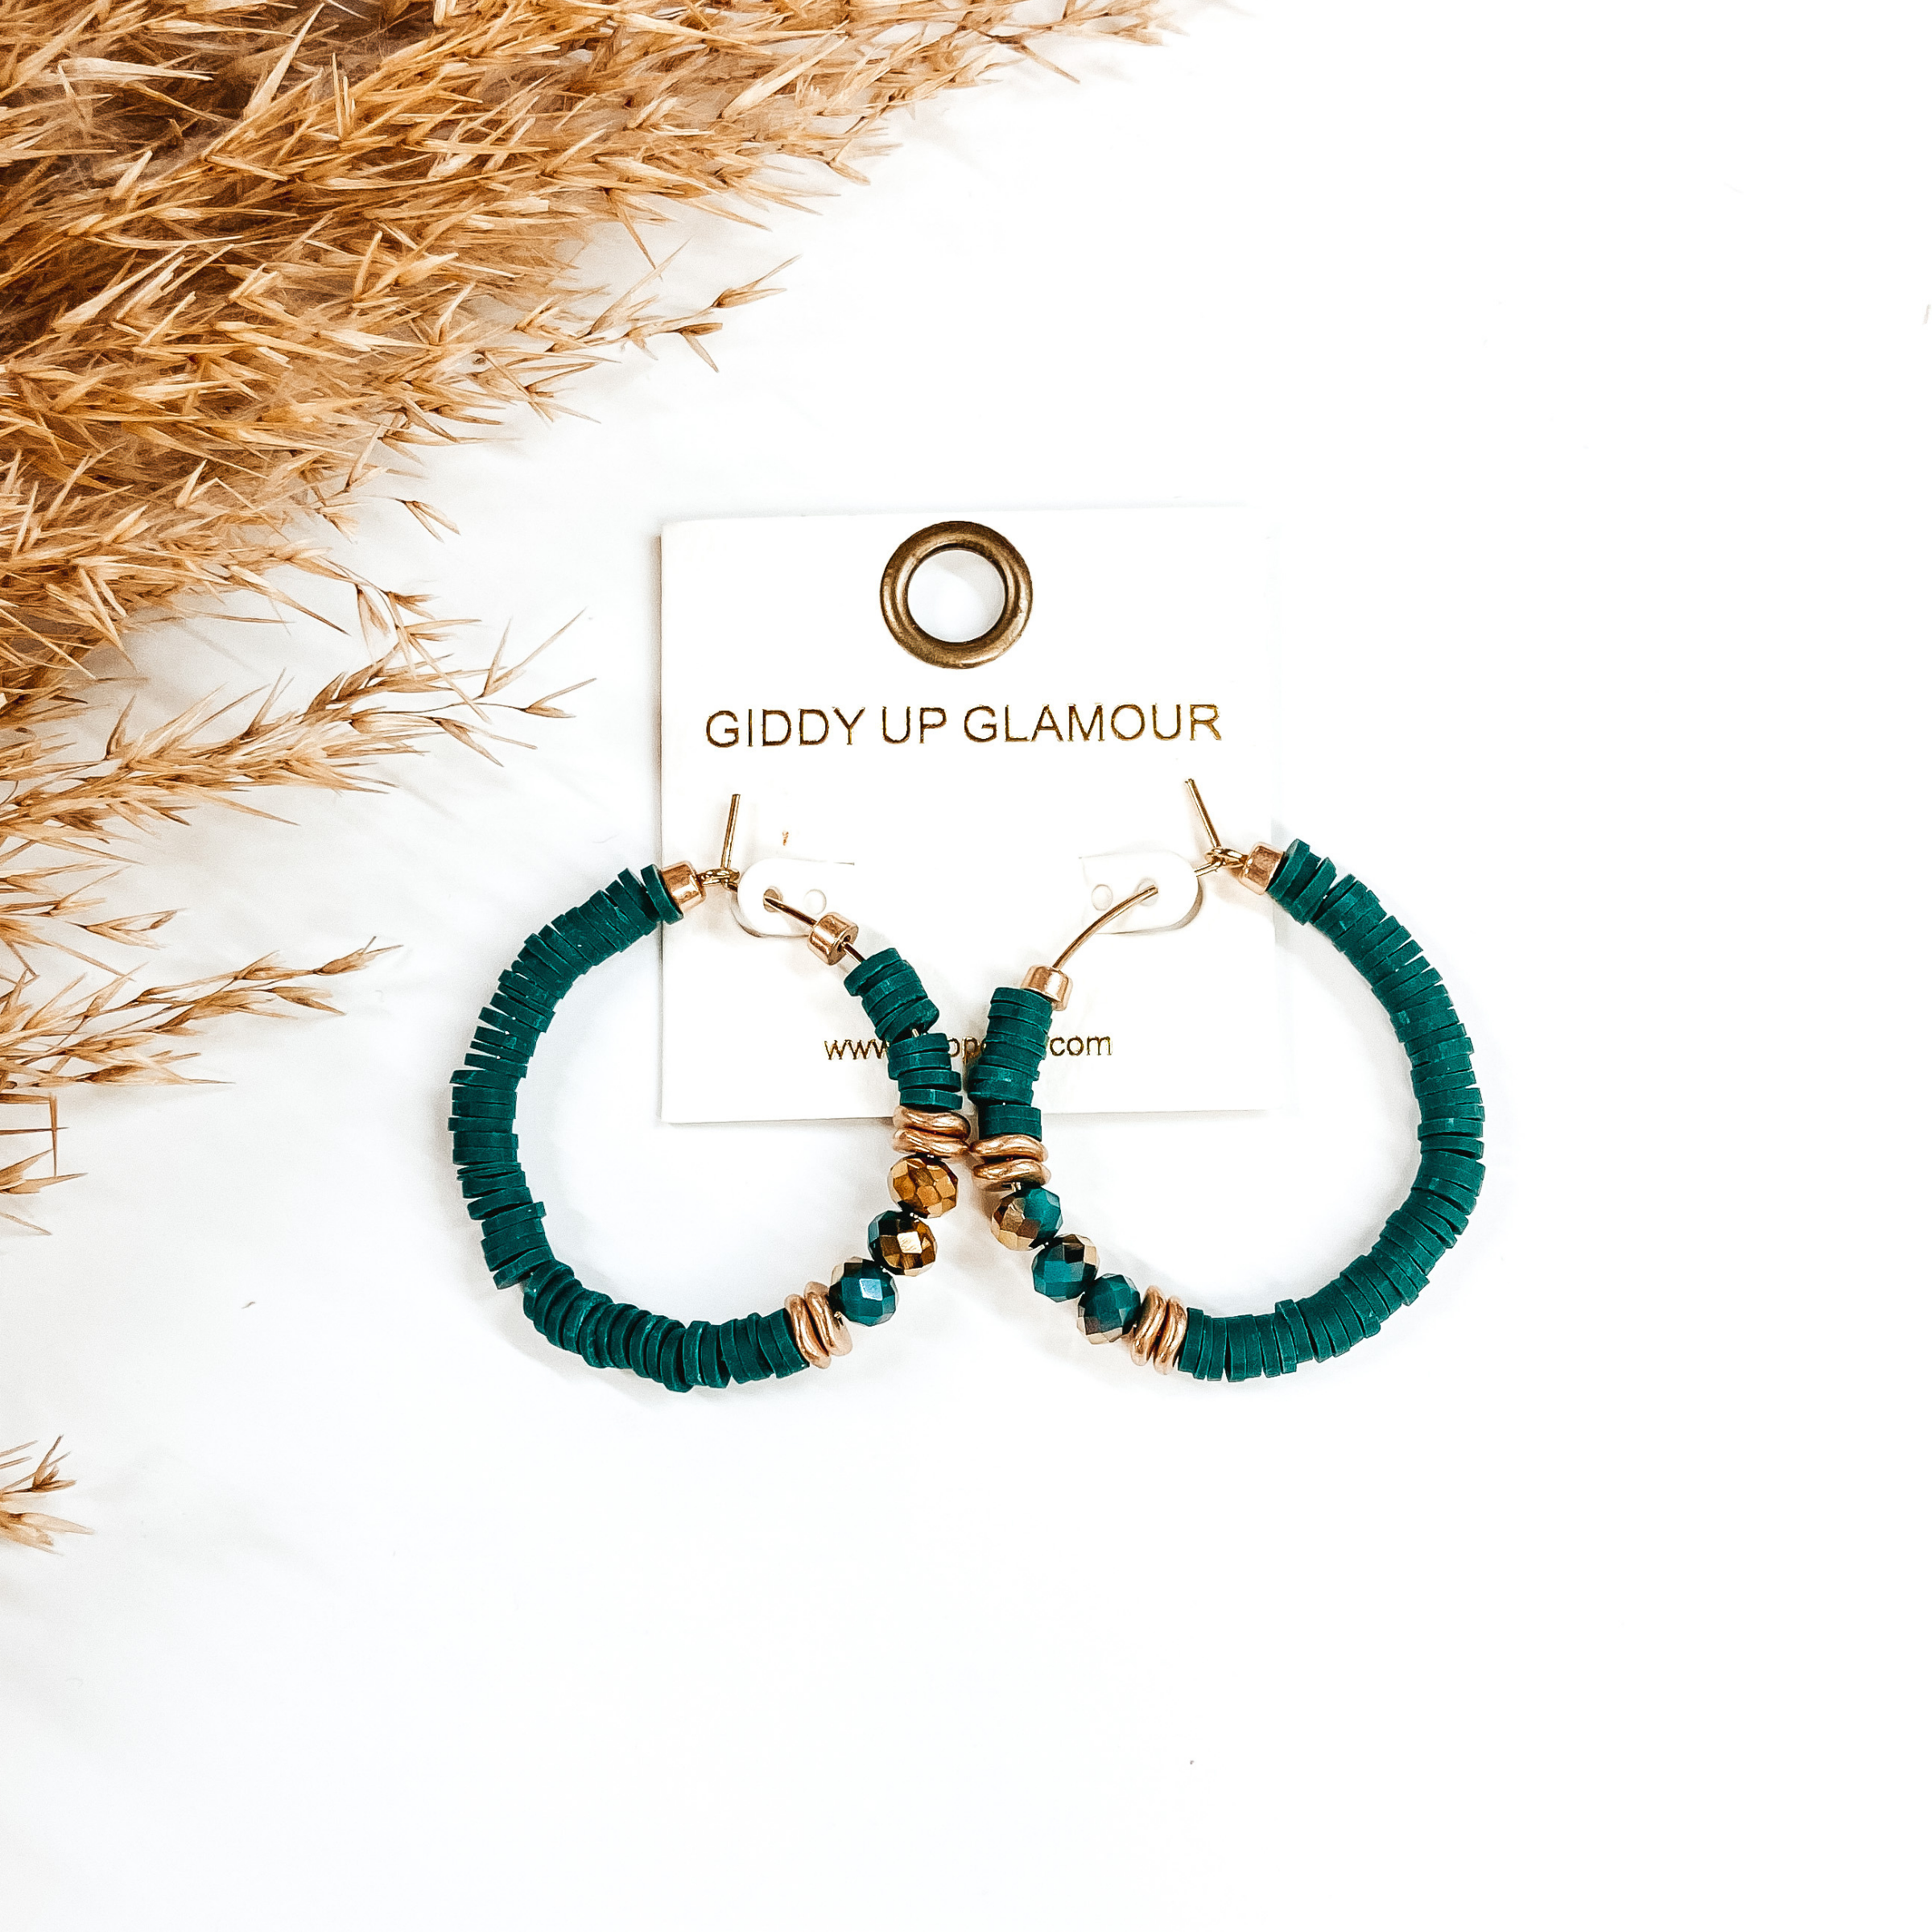 Disc Bead Hoop Earrings with Gold and Crystal Accent in Emerald Green - Giddy Up Glamour Boutique